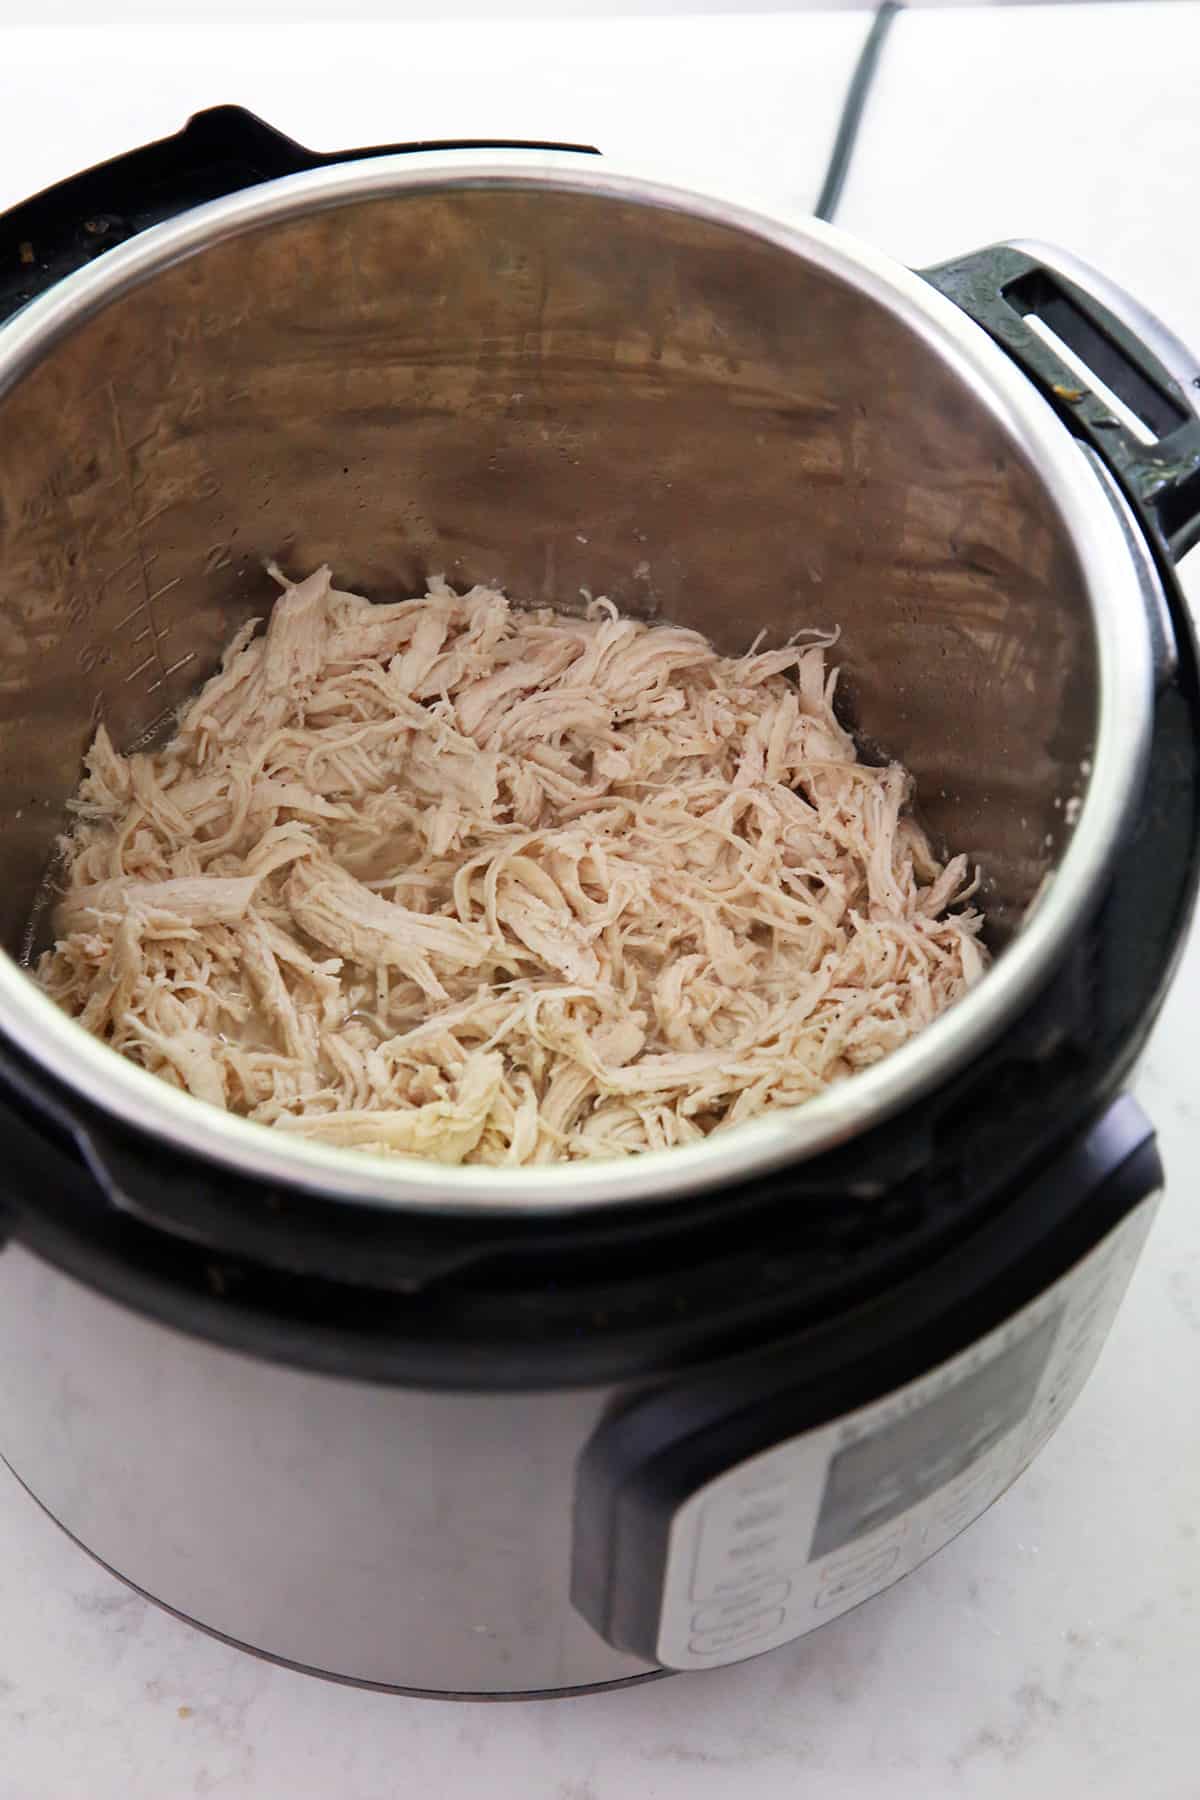 Pulled chicken in instant pot